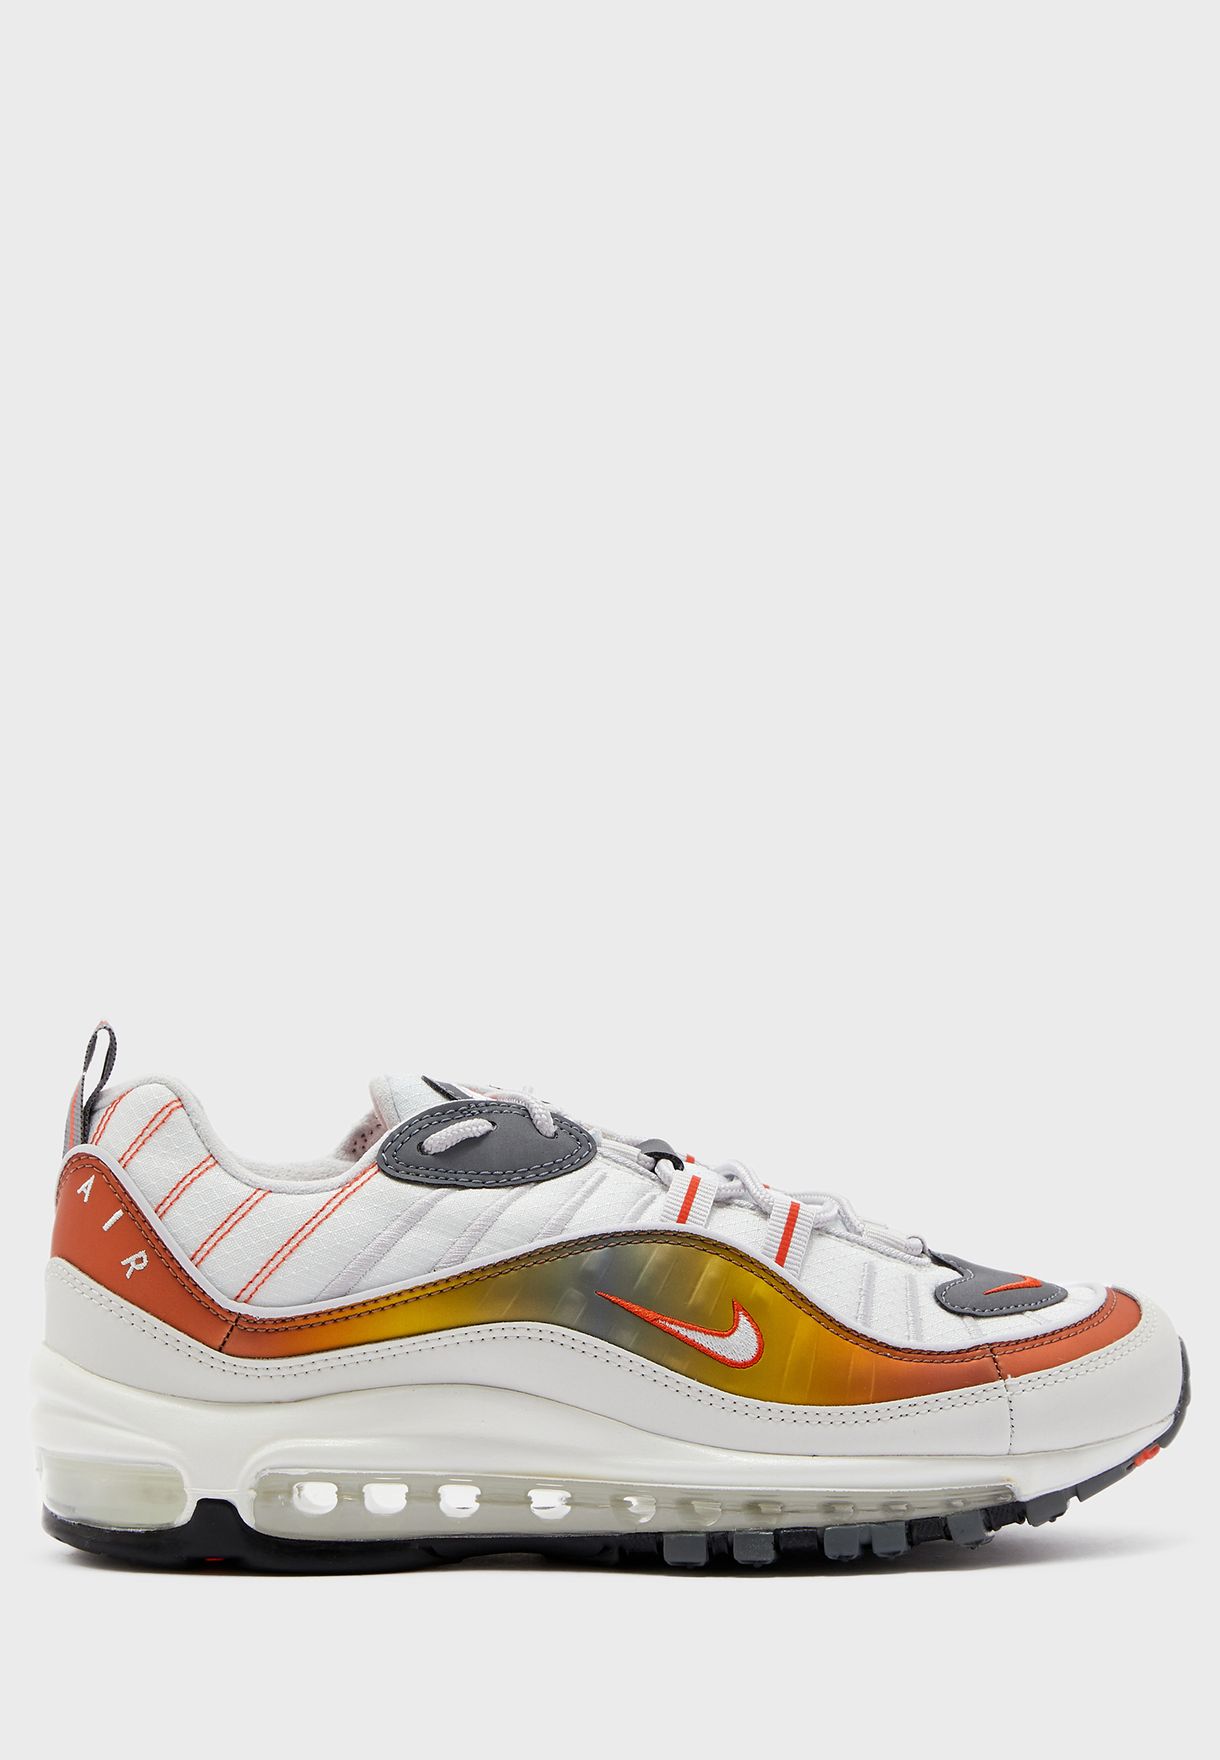 Buy Nike multicolor Air Max 98 SE for 